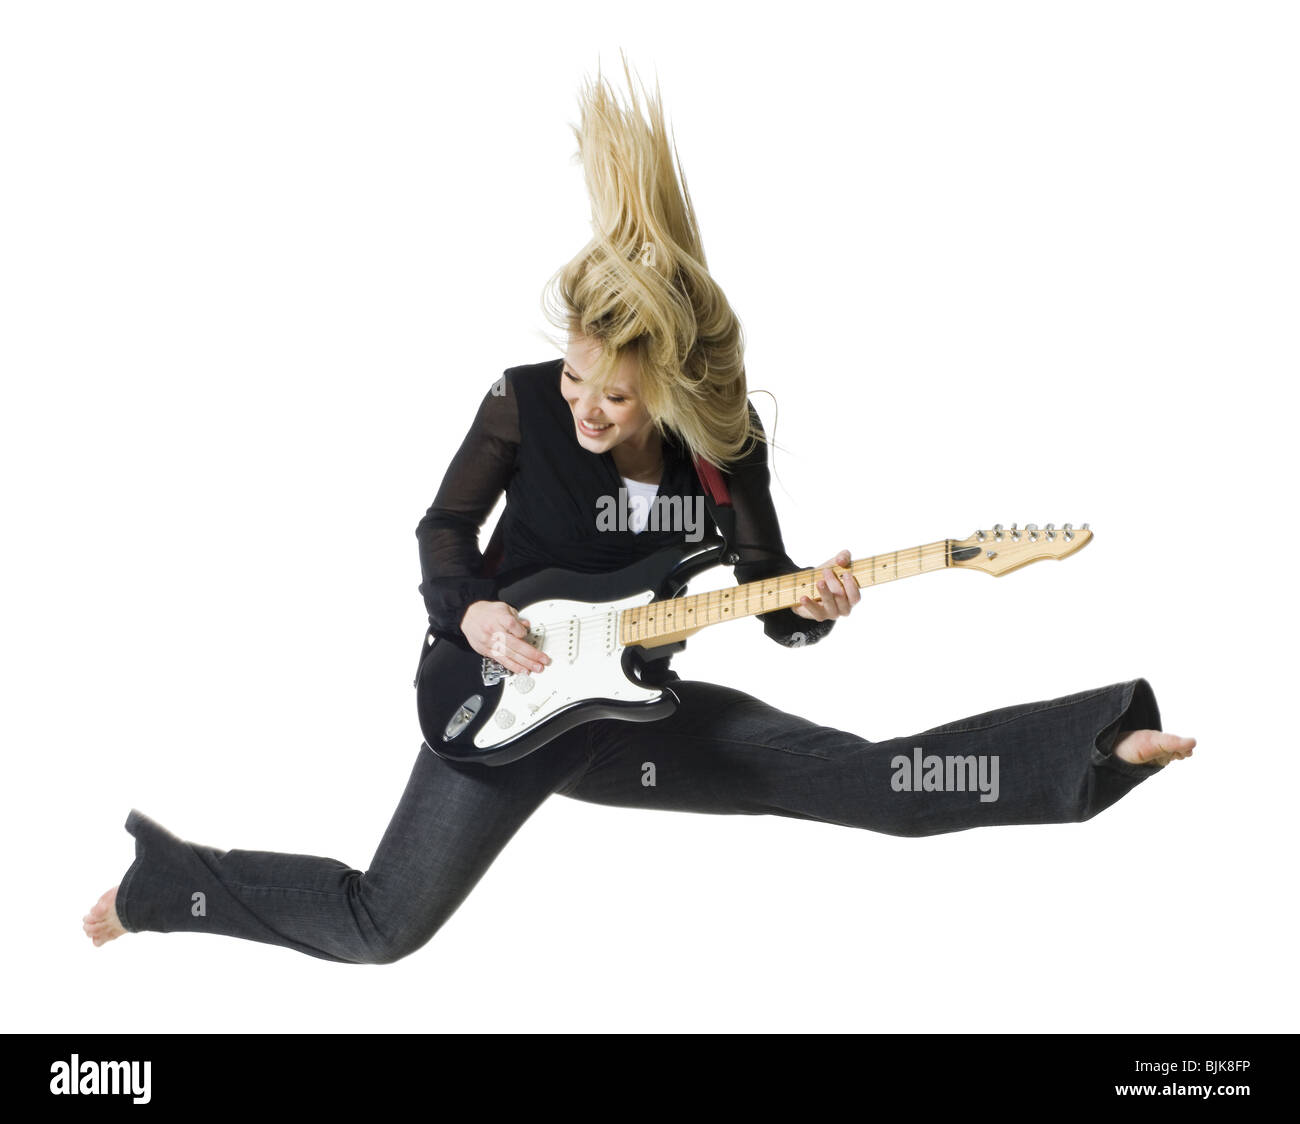 Profile of woman jumping with electric guitar Stock Photo